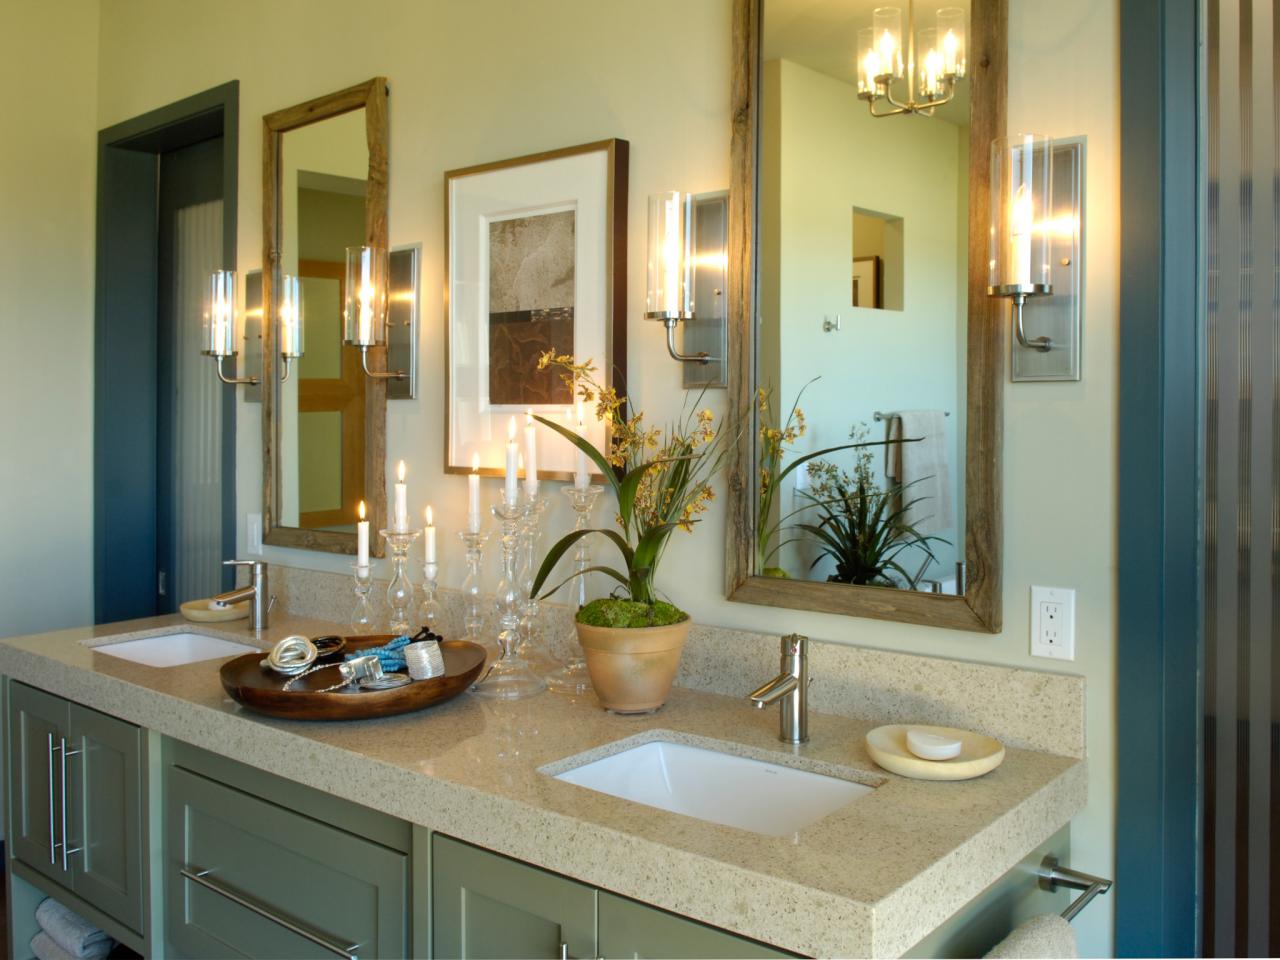 Designing and planning your luxury bathroom